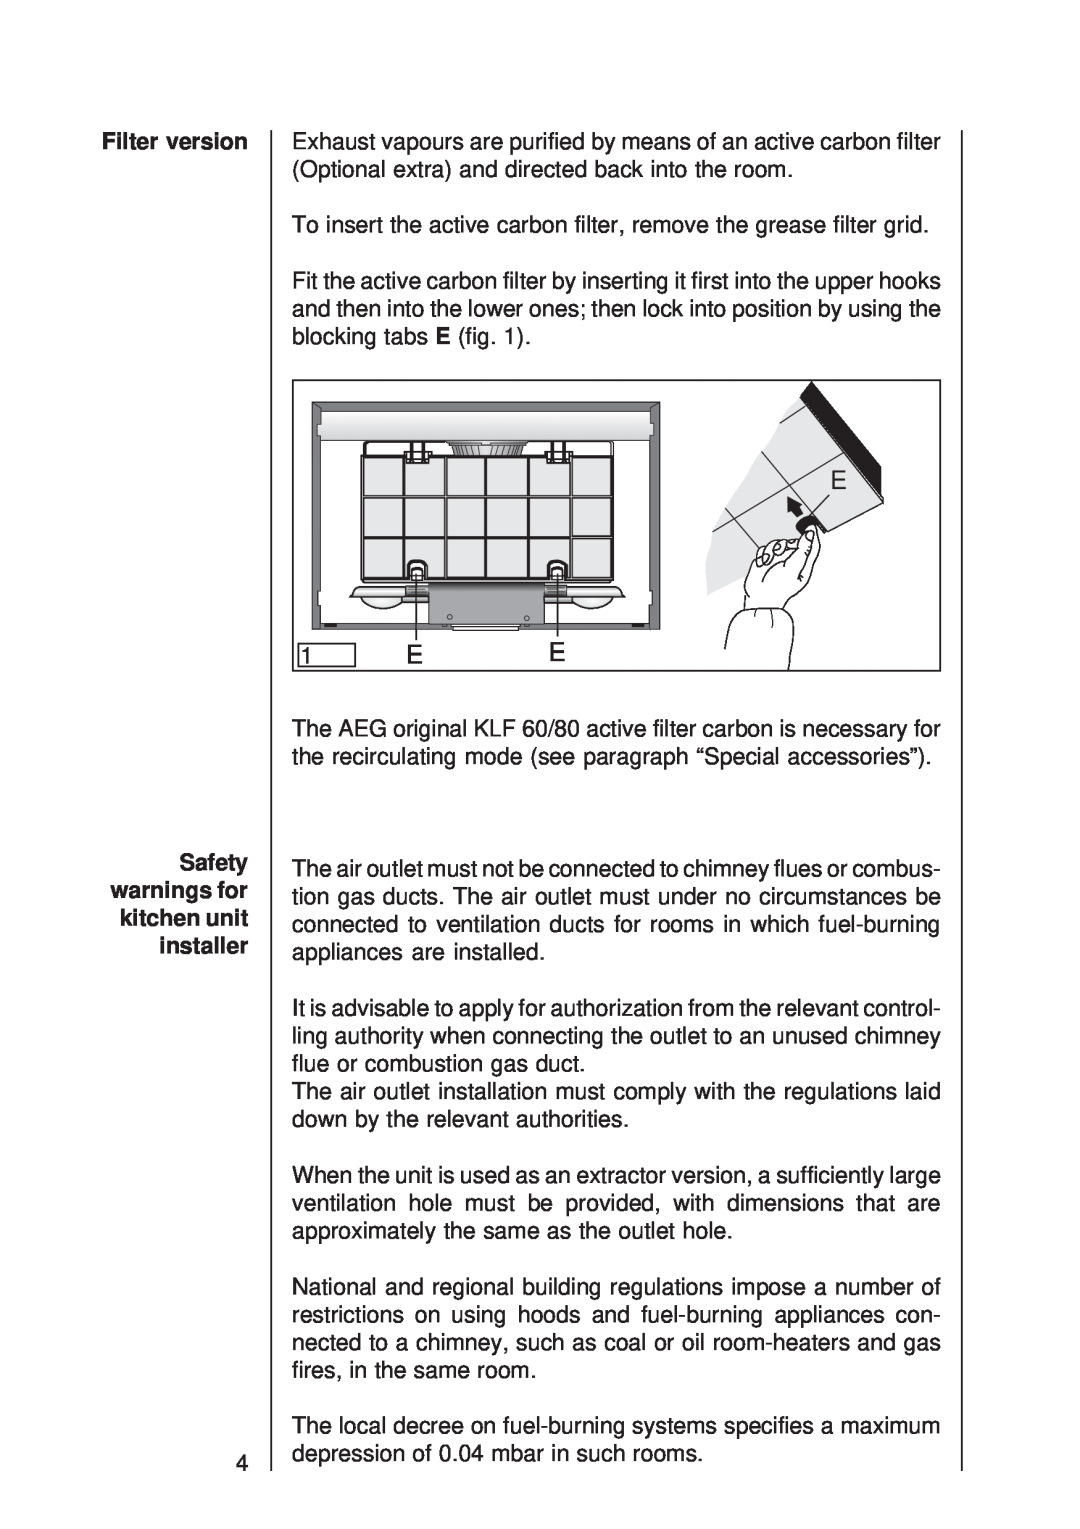 Electrolux 335 D operating instructions Filter version Safety warnings for kitchen unit installer 